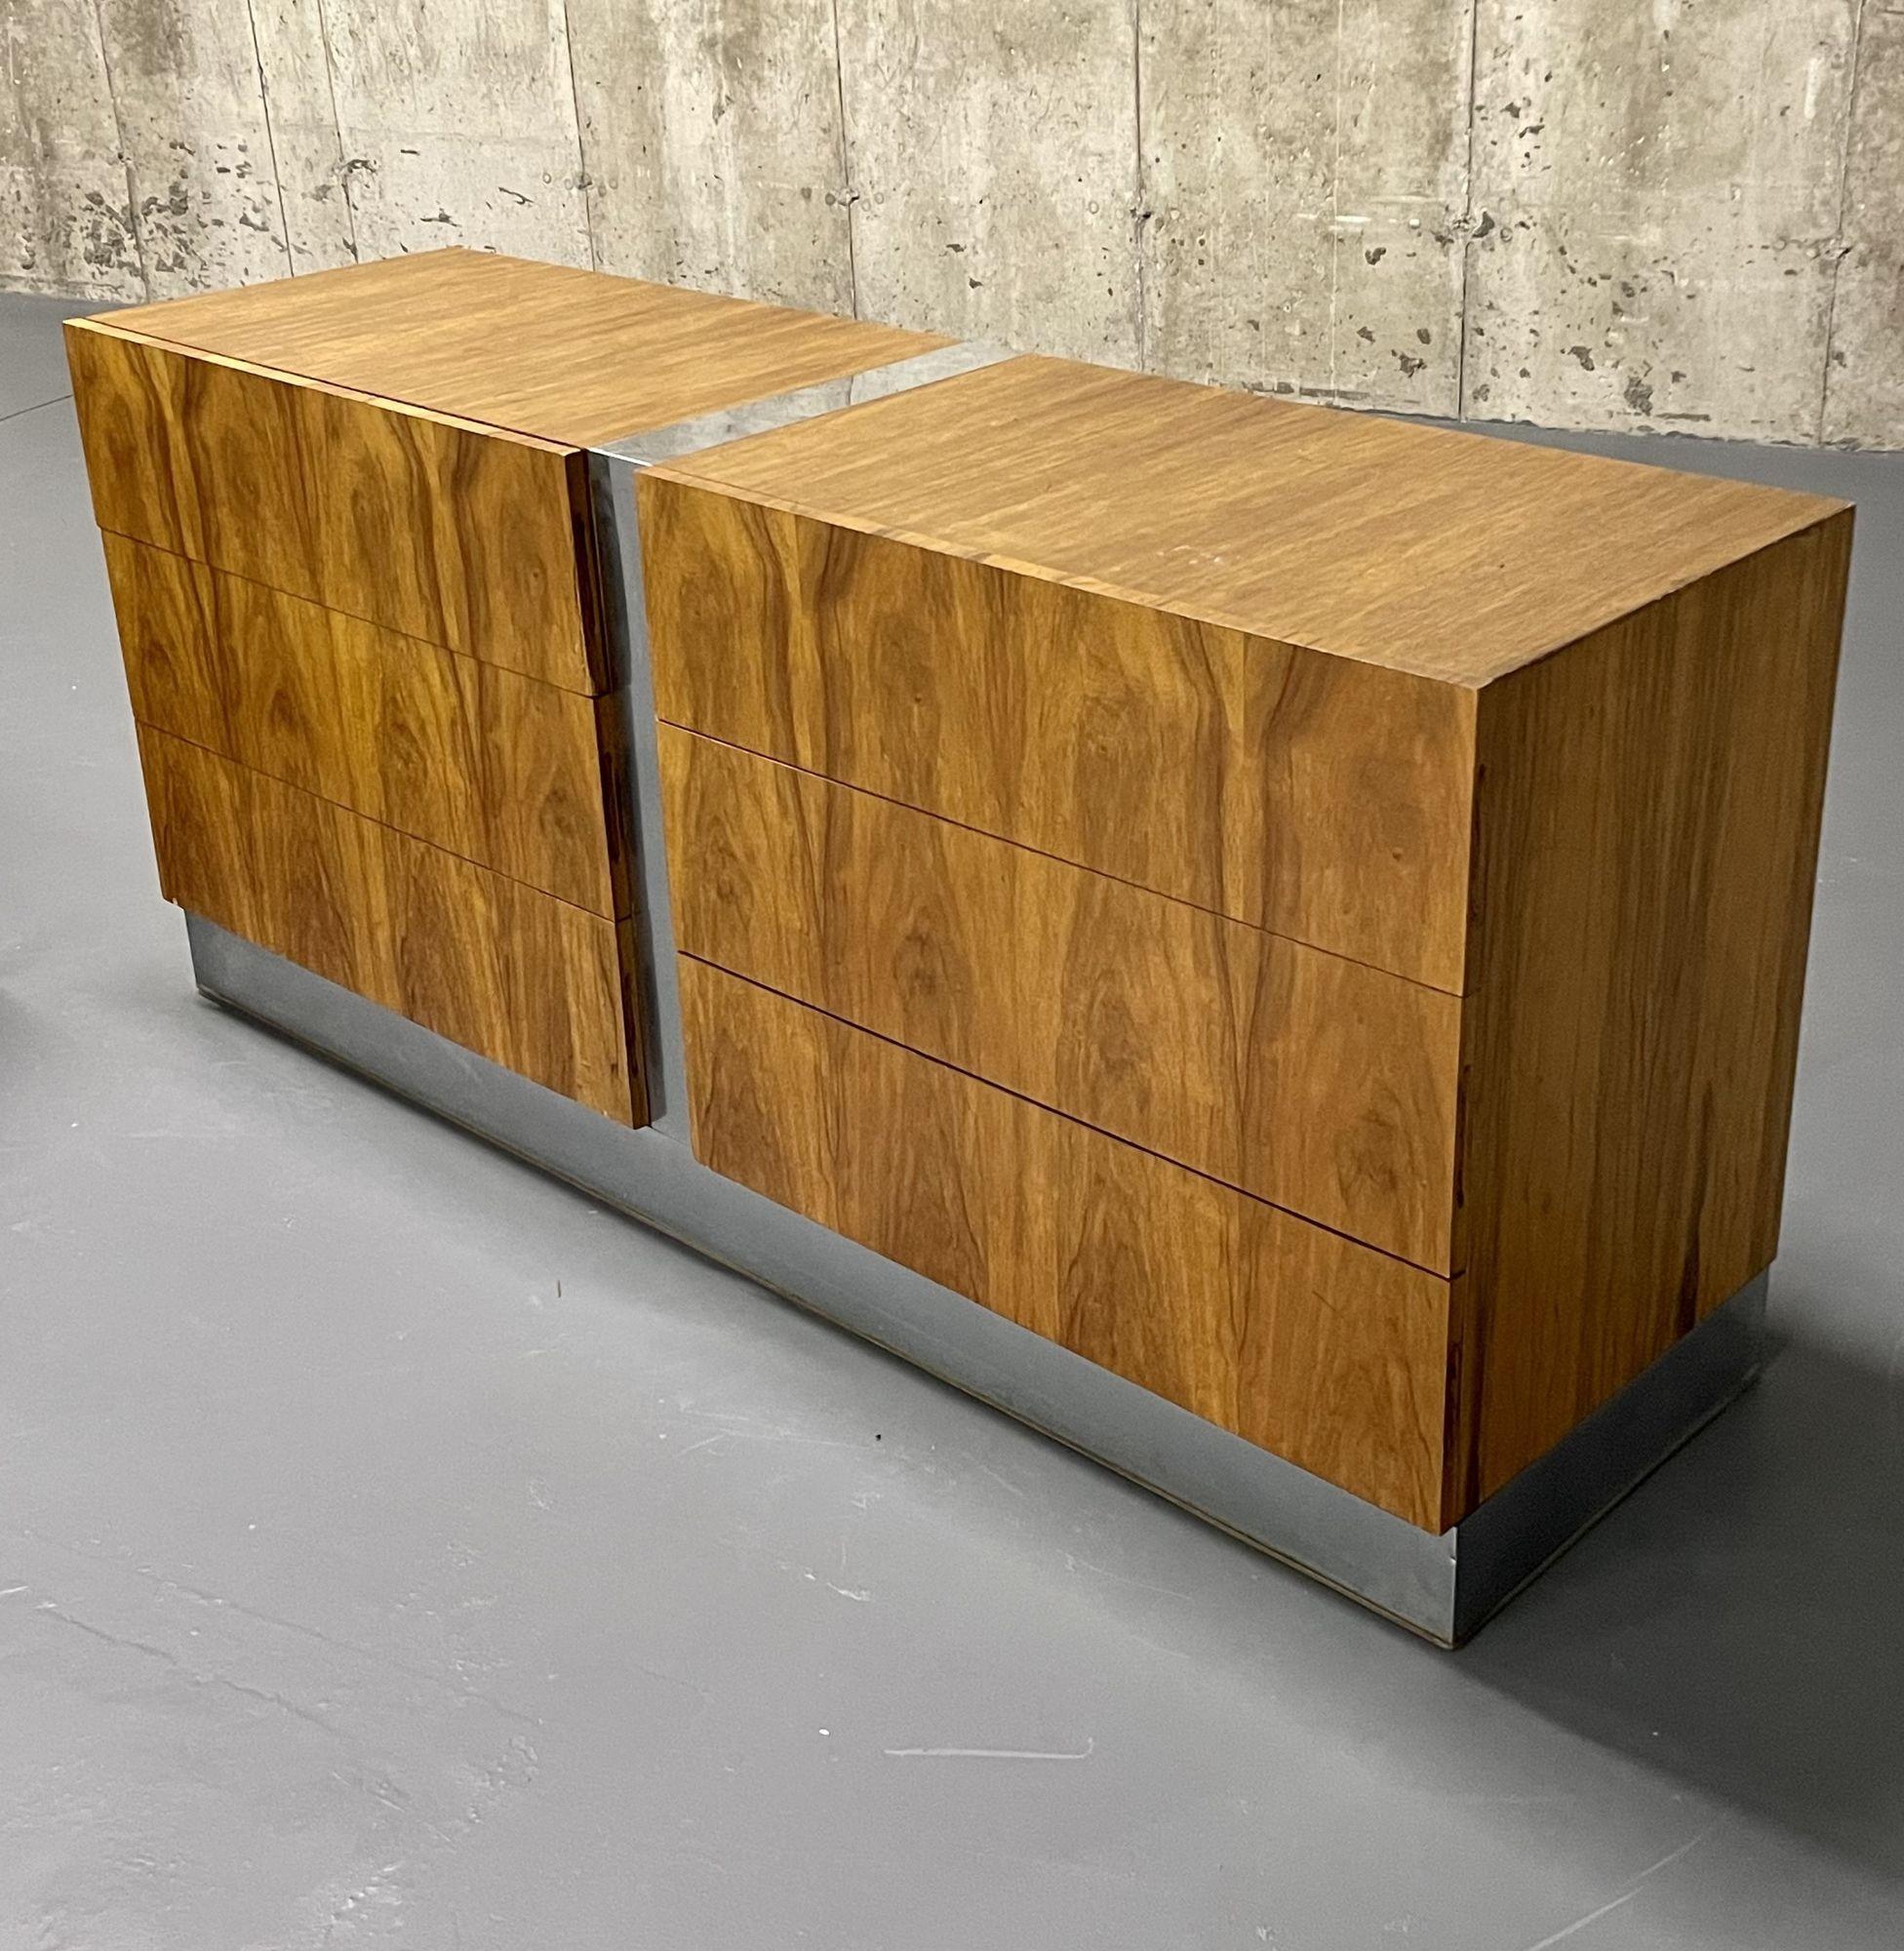 Milo Baughman for Thayer Coggin Commode/Dresser/Nightstand. One of a compatible pair of Chests by this highly regarded duo. This listing is for a single chest. 
 
Compatible pair of chests of drawers by Milo Baughman for Thayer Coggin. Each